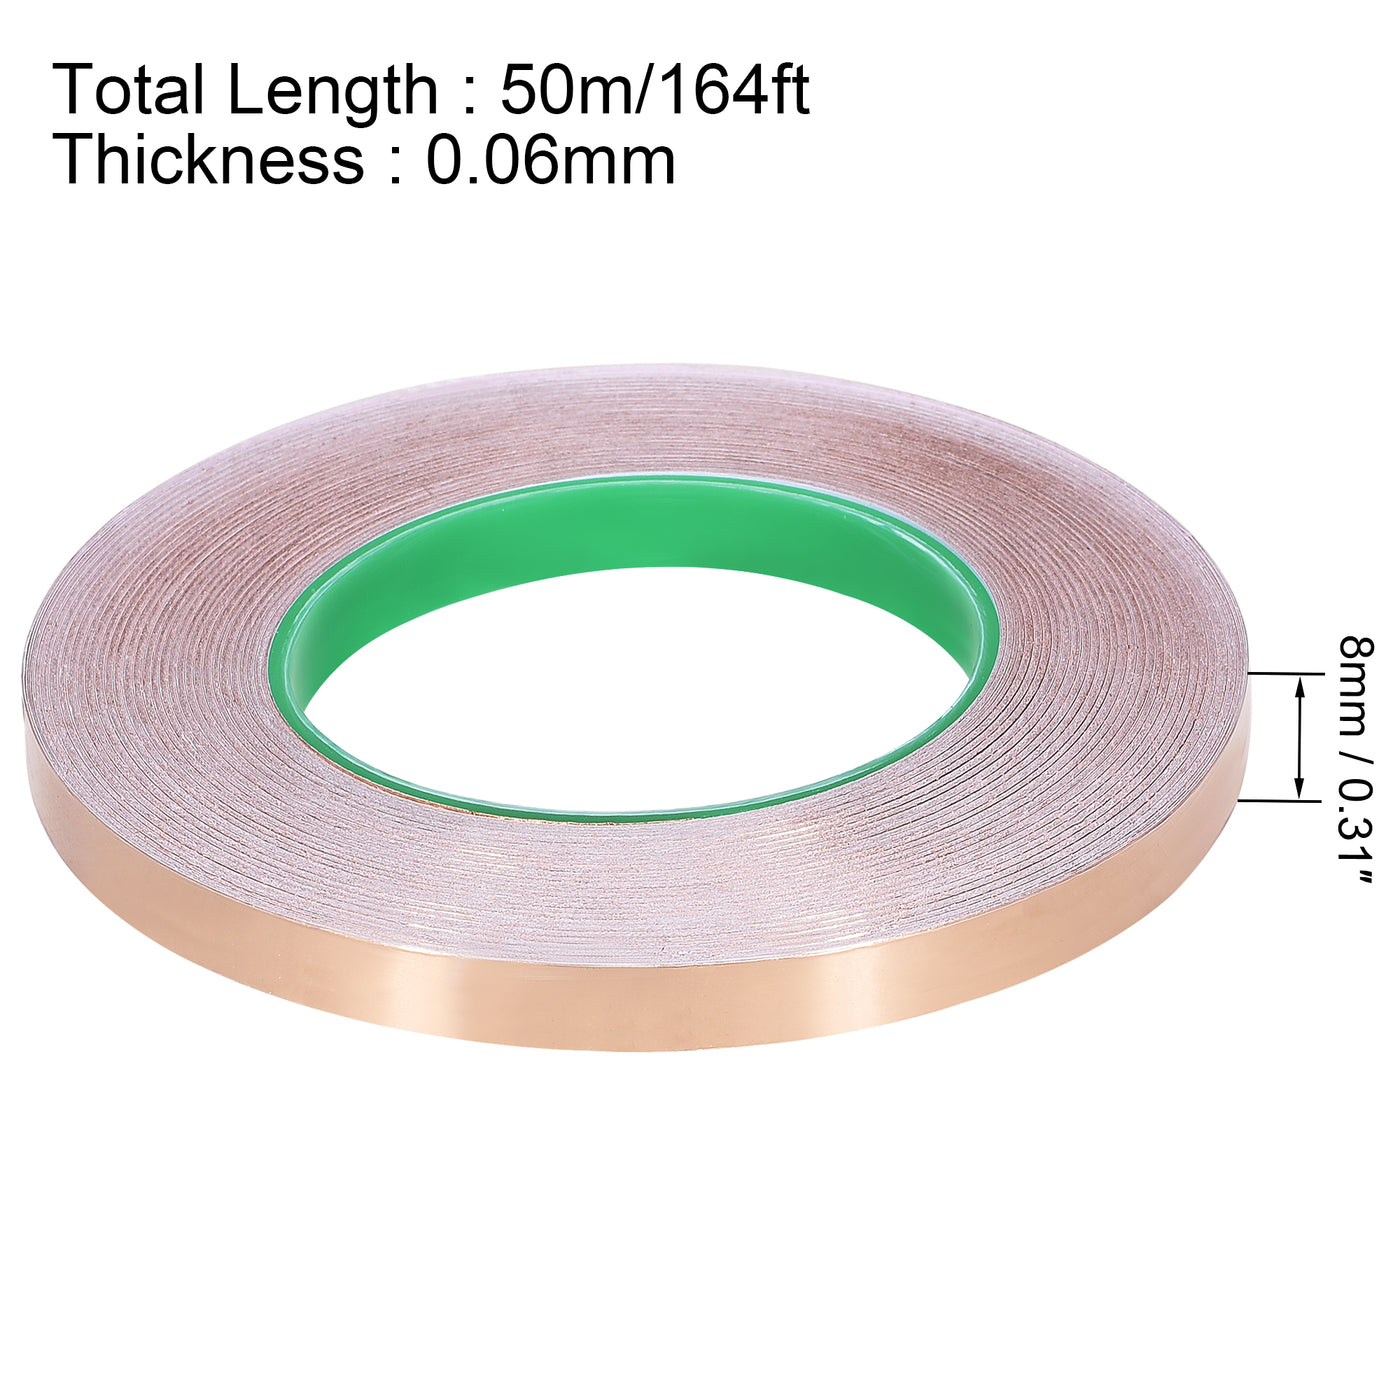 uxcell Uxcell Double-Sided Conductive Tape Copper Foil Tape 8mm x 50m/164ft for EMI Shielding 1pcs